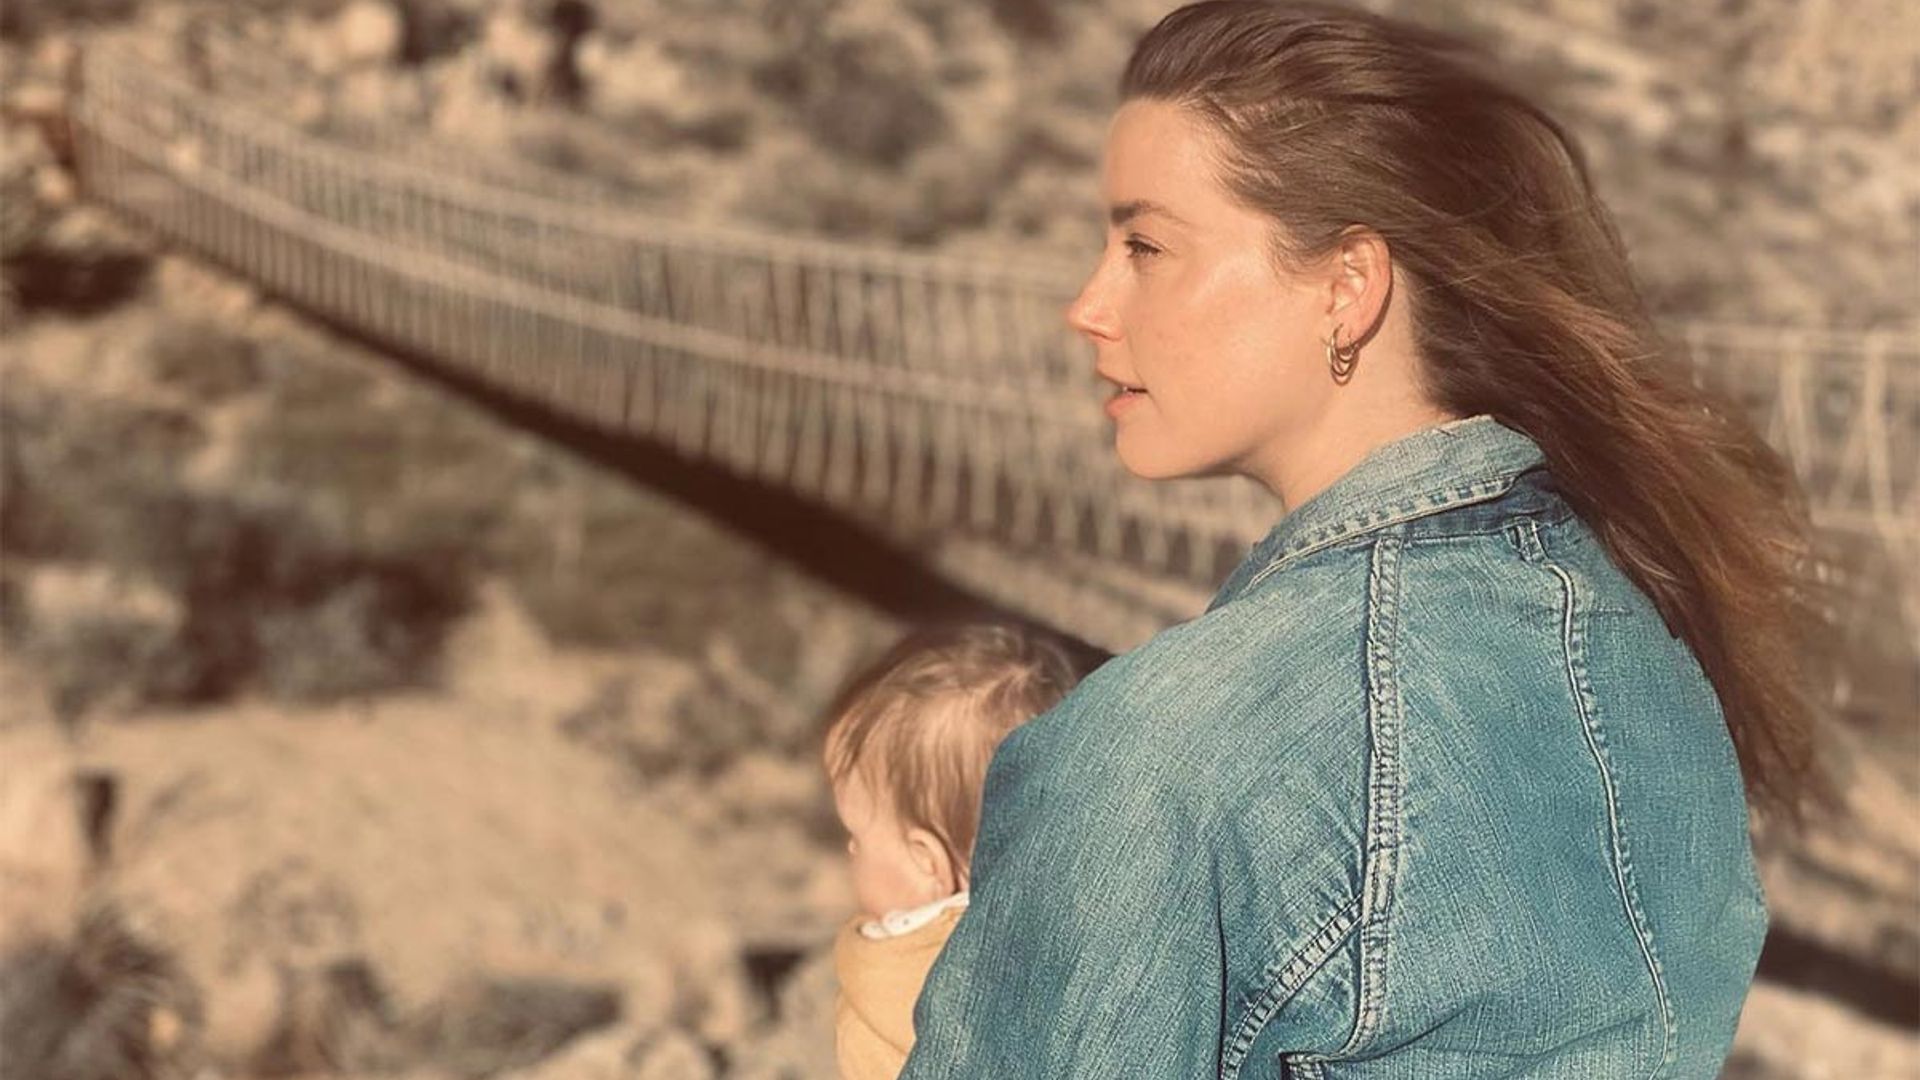 The remote town where Amber Heard plans to be a 'full-time mom' with daughter Oonagh